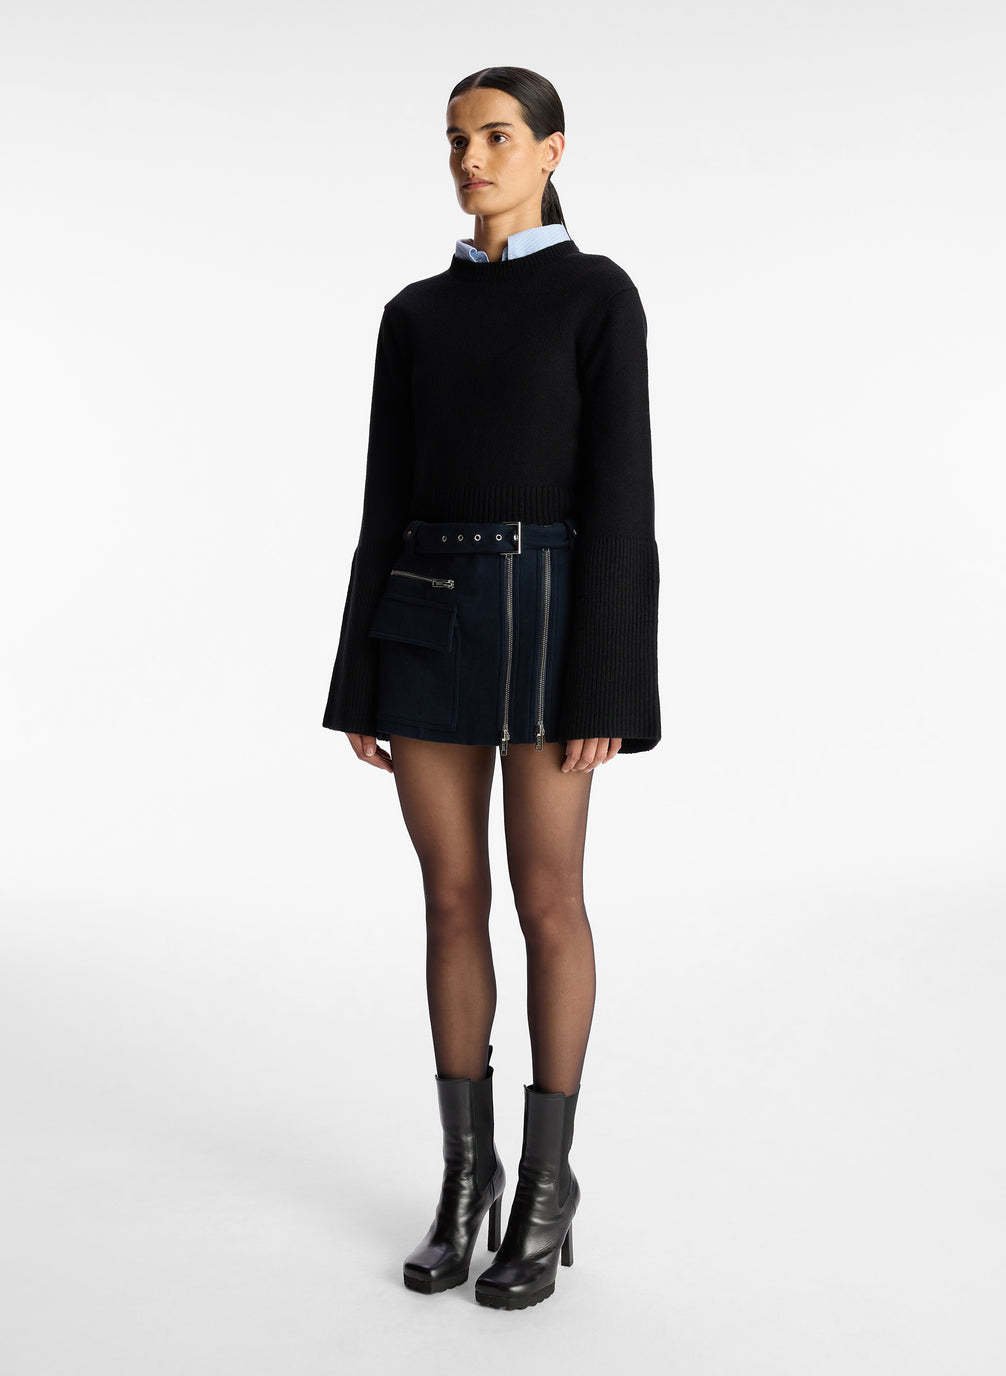 side view of woman wearing navy blue sweater, blue shirt, and navy zipper detailed mini skirt